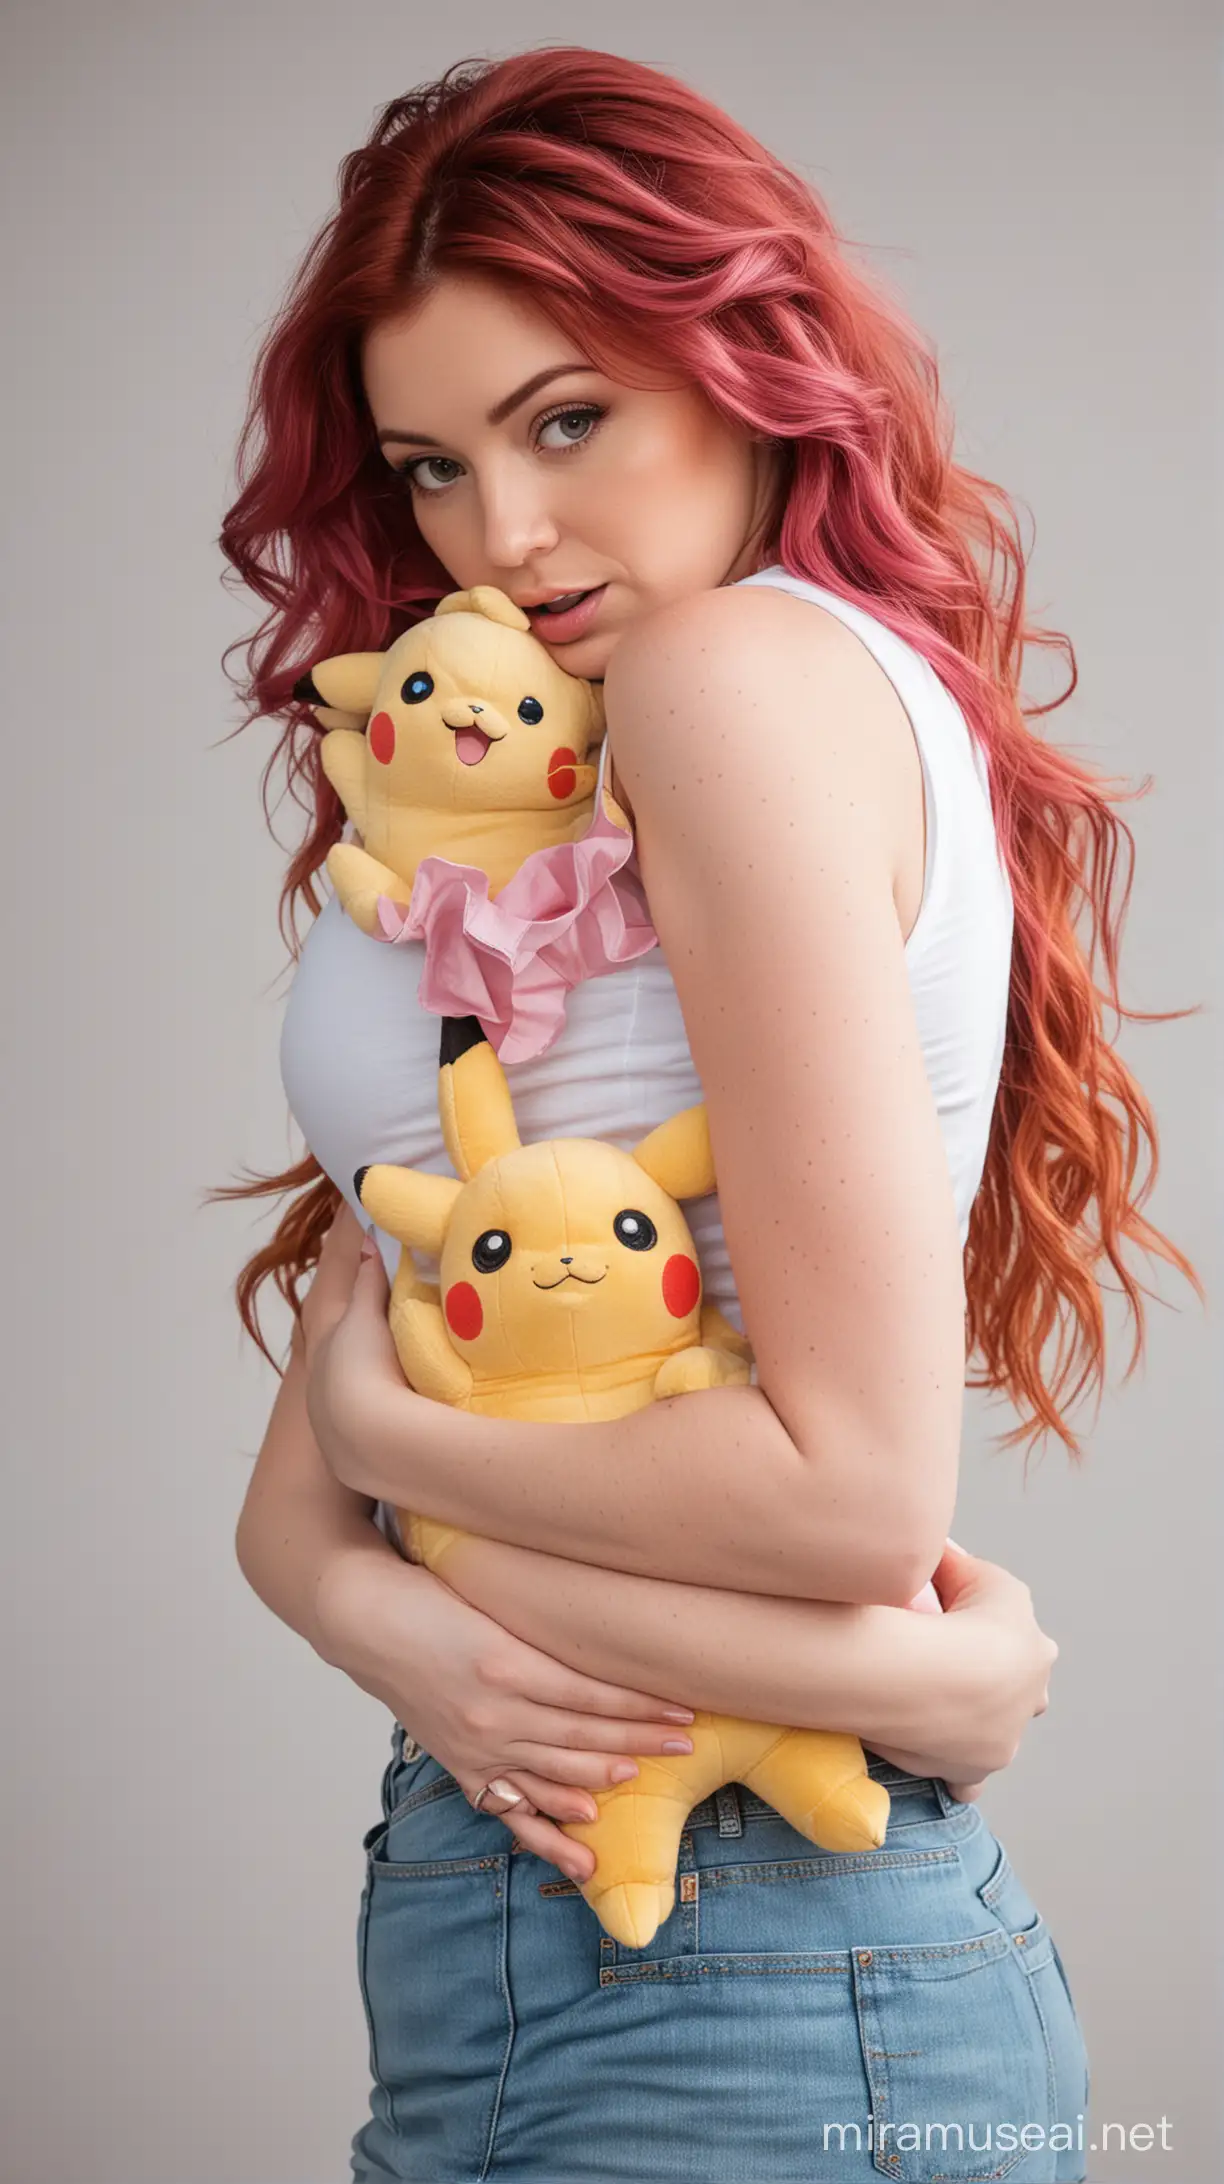 Angry Woman Gripping Pikachu Plushie in Fit of Rage